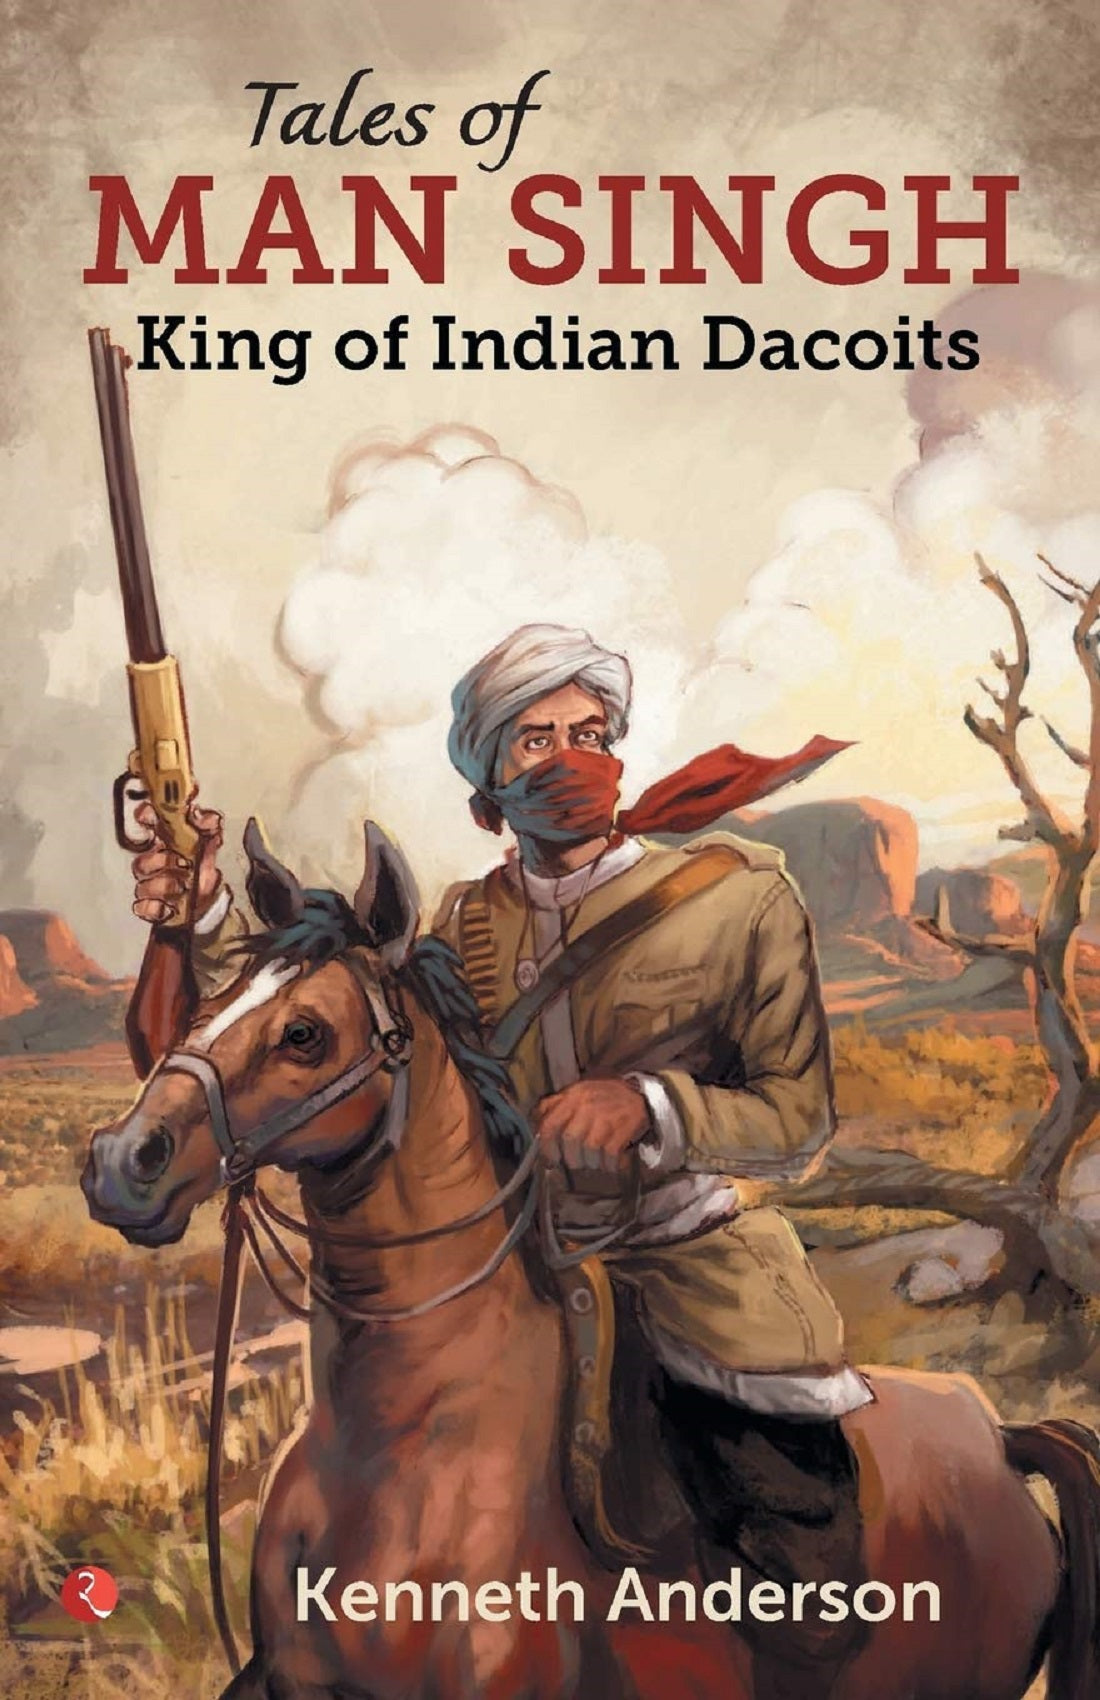 TALES OF MAN SINGH - TALES OF INDIAN DACOIT